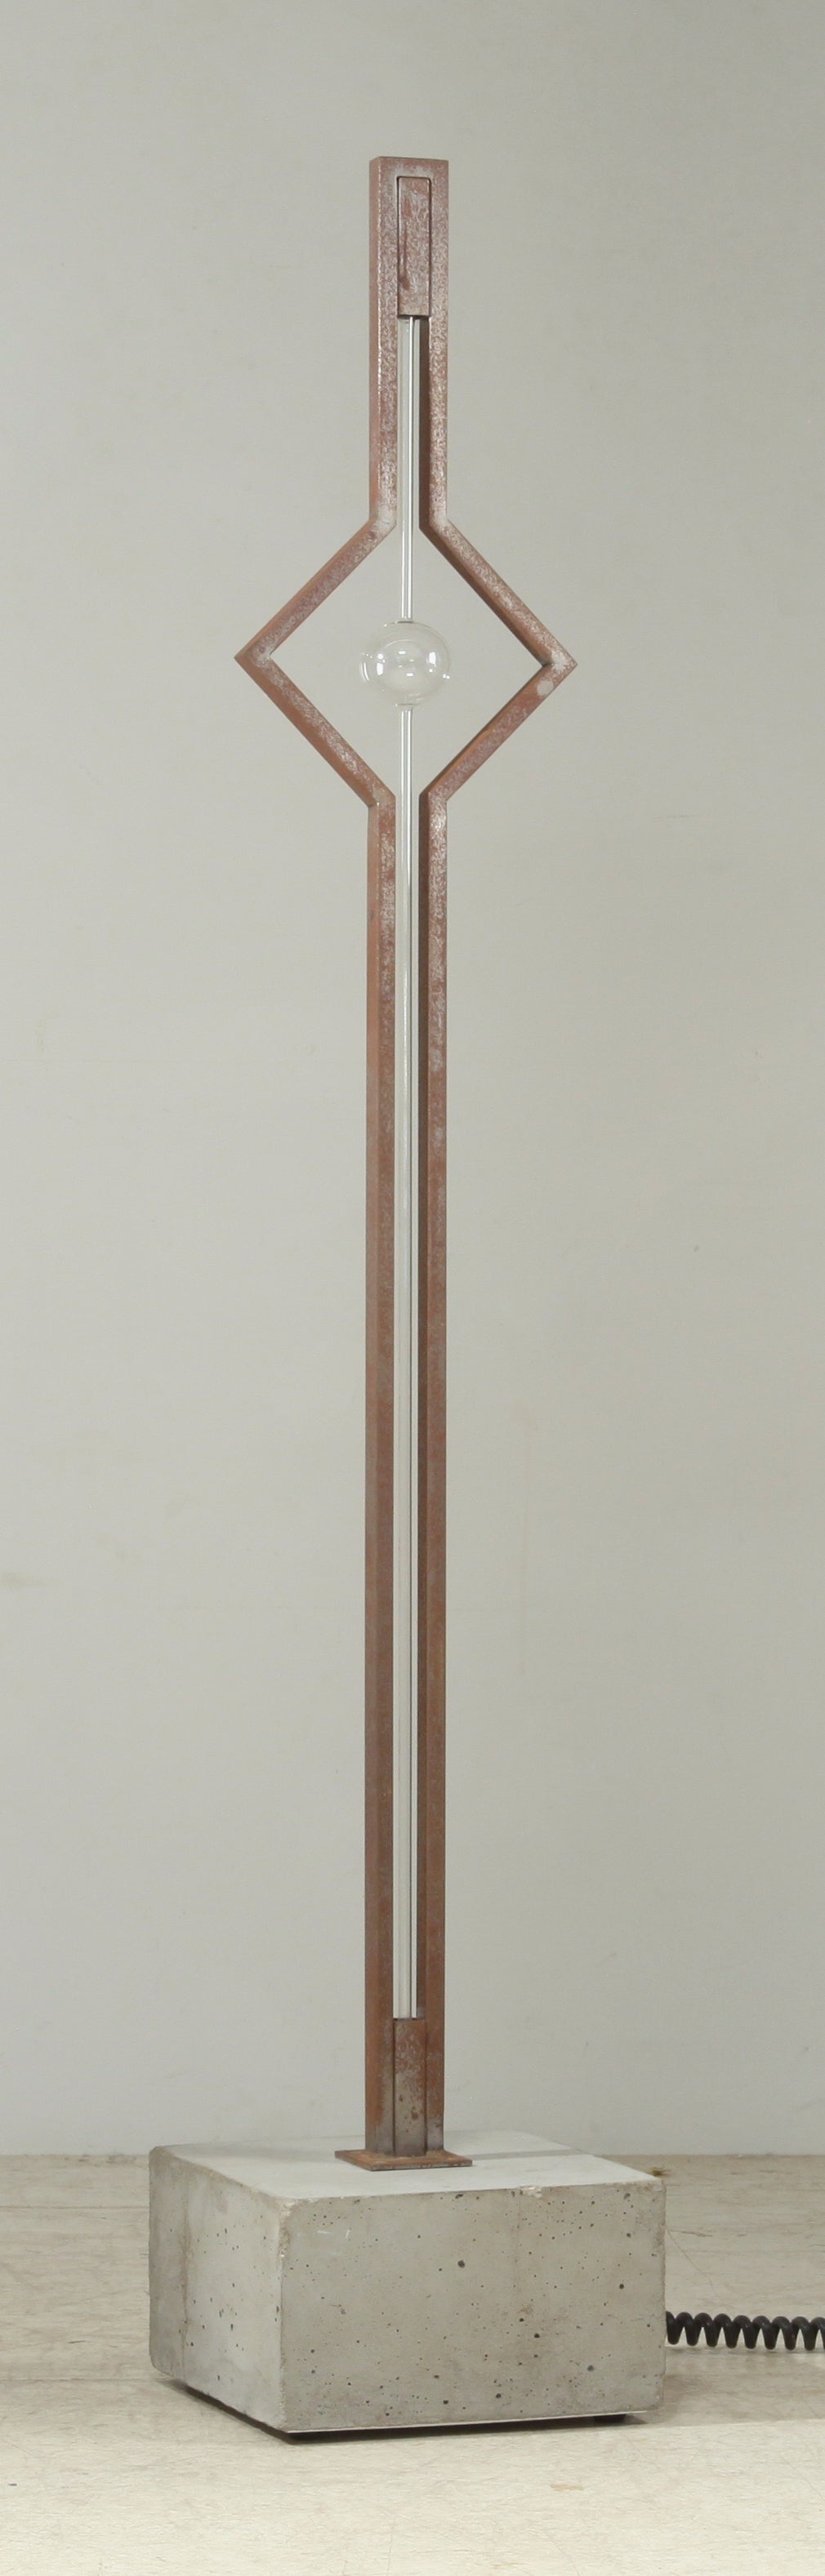 A very rare and published floor lamp designed in 1987 by Pentagon member Gerd Arens. The lamp is made of a concrete base and a steel frame with a neon light on it. Towards the top the frame and the neon tubes form a square with a globe inside.